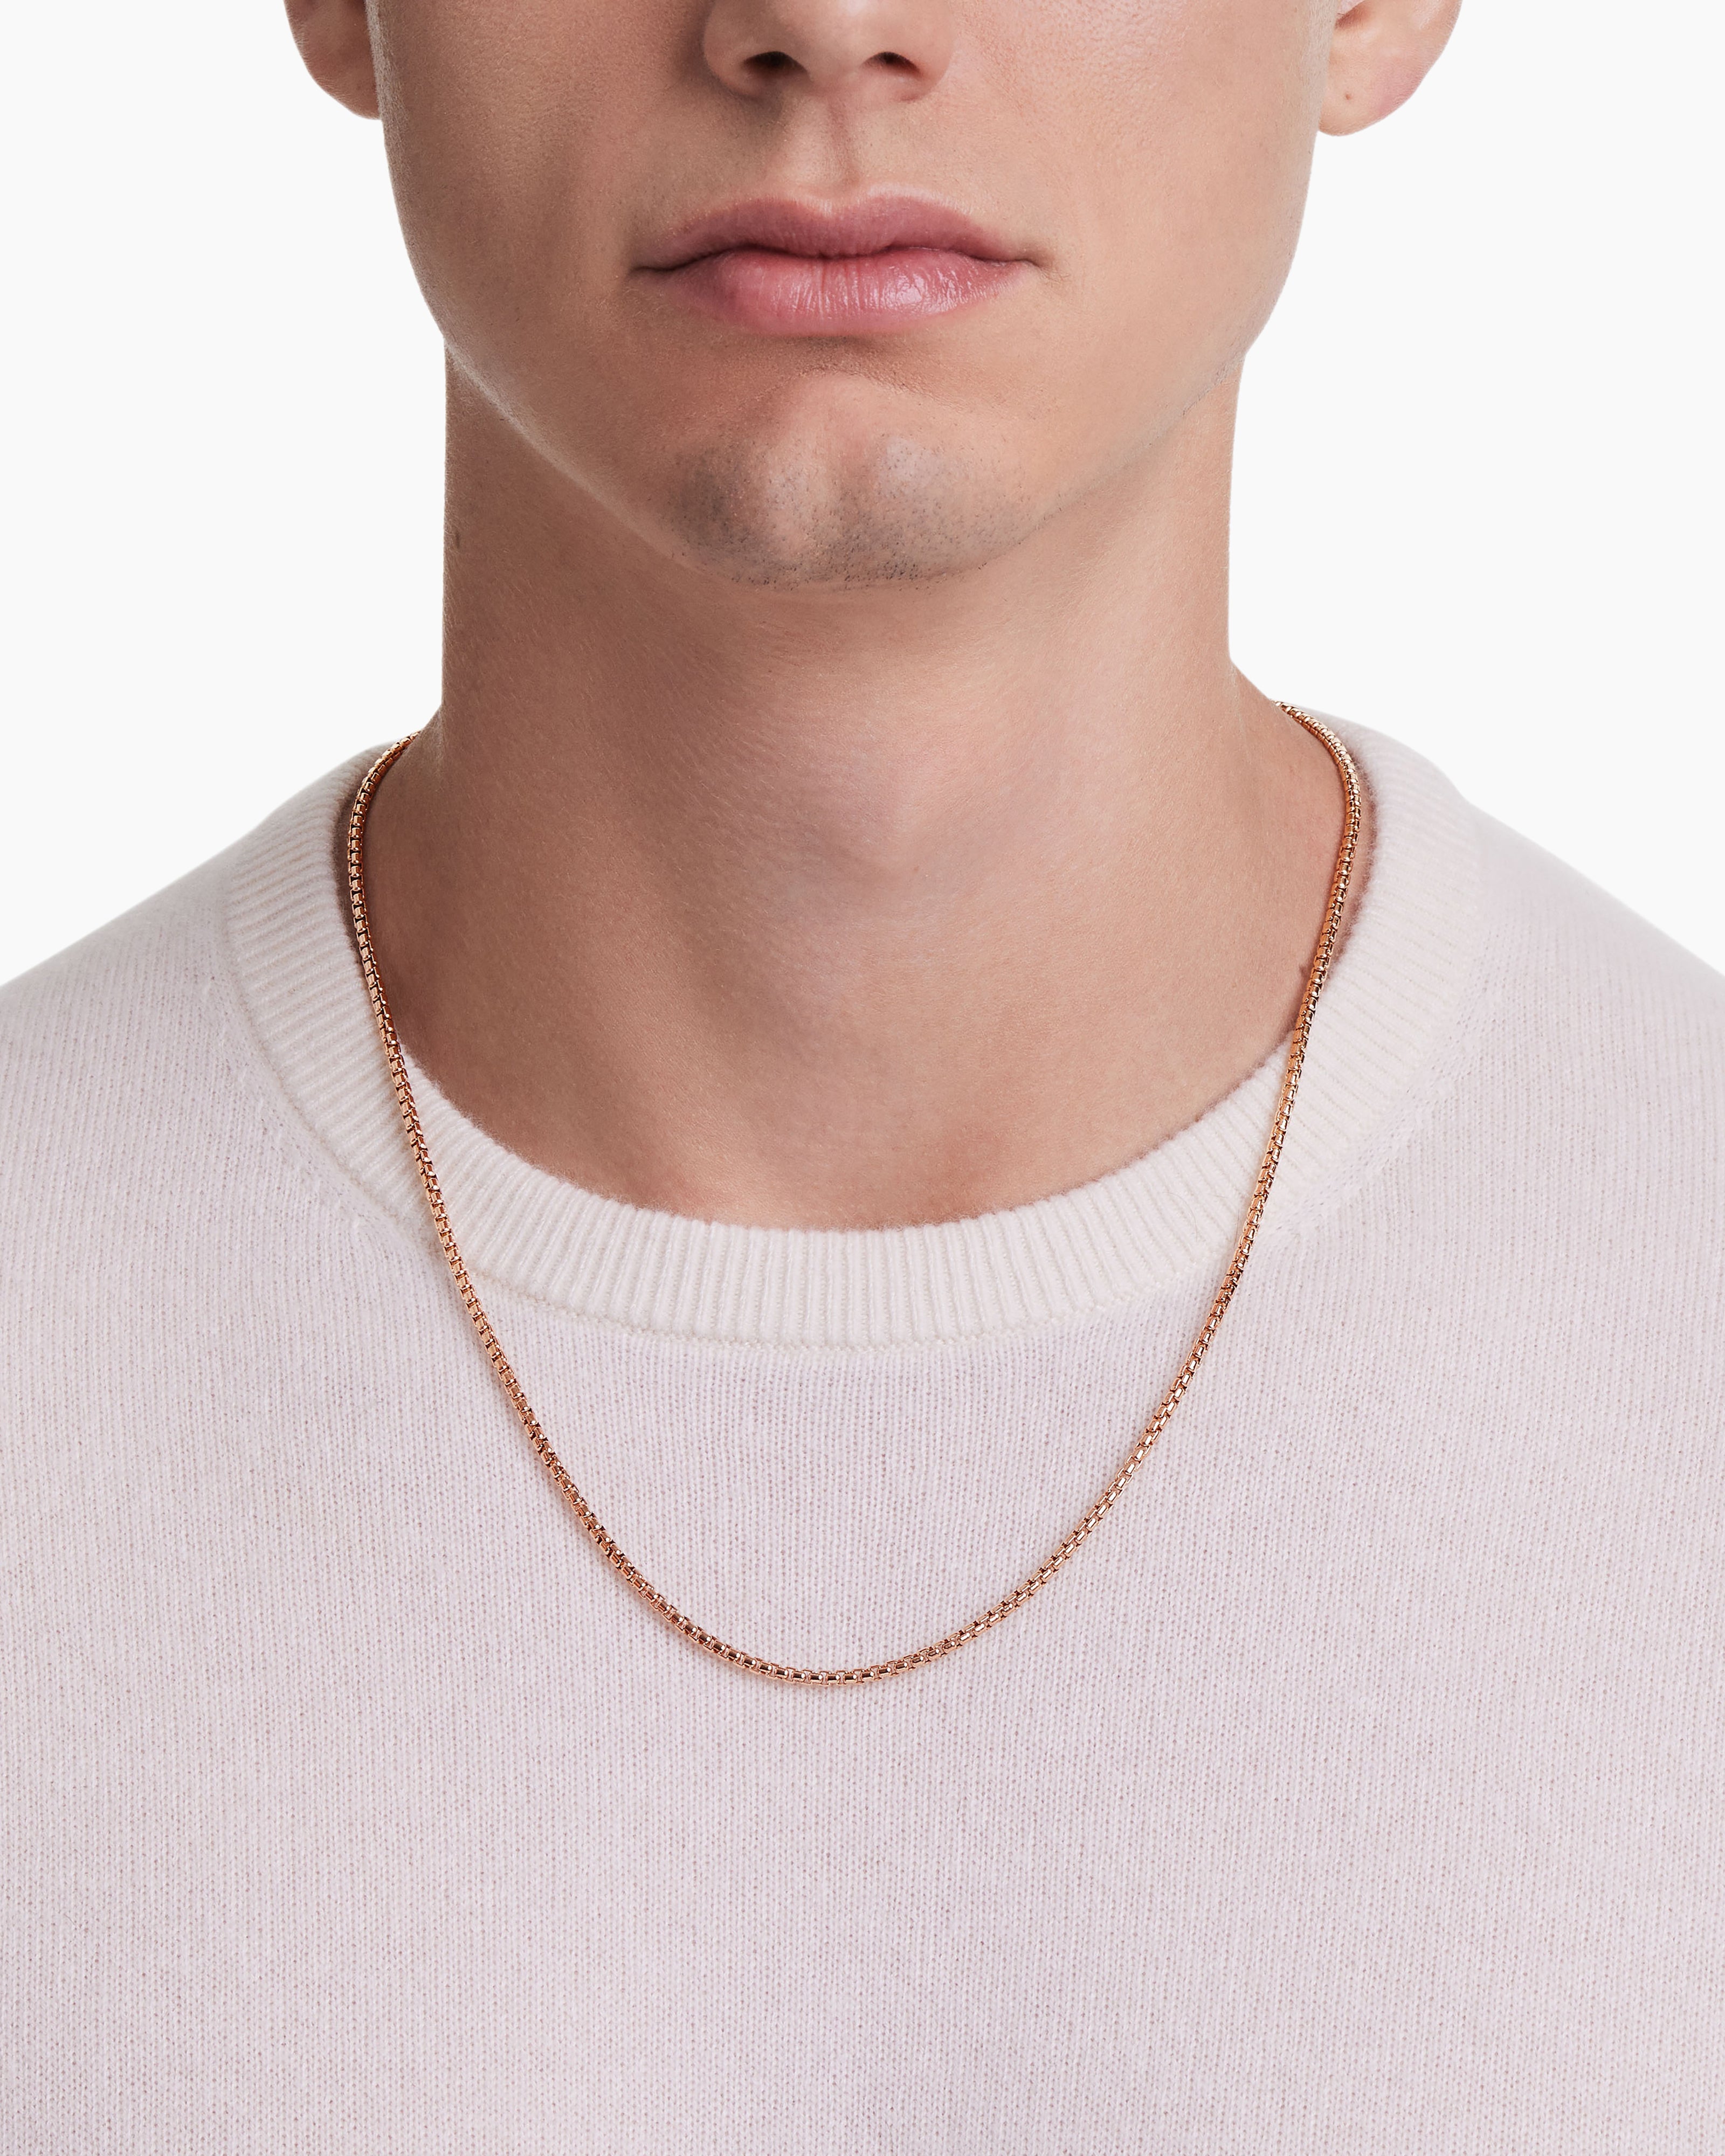 Solid Box Chain Necklace 14K Rose Gold 18